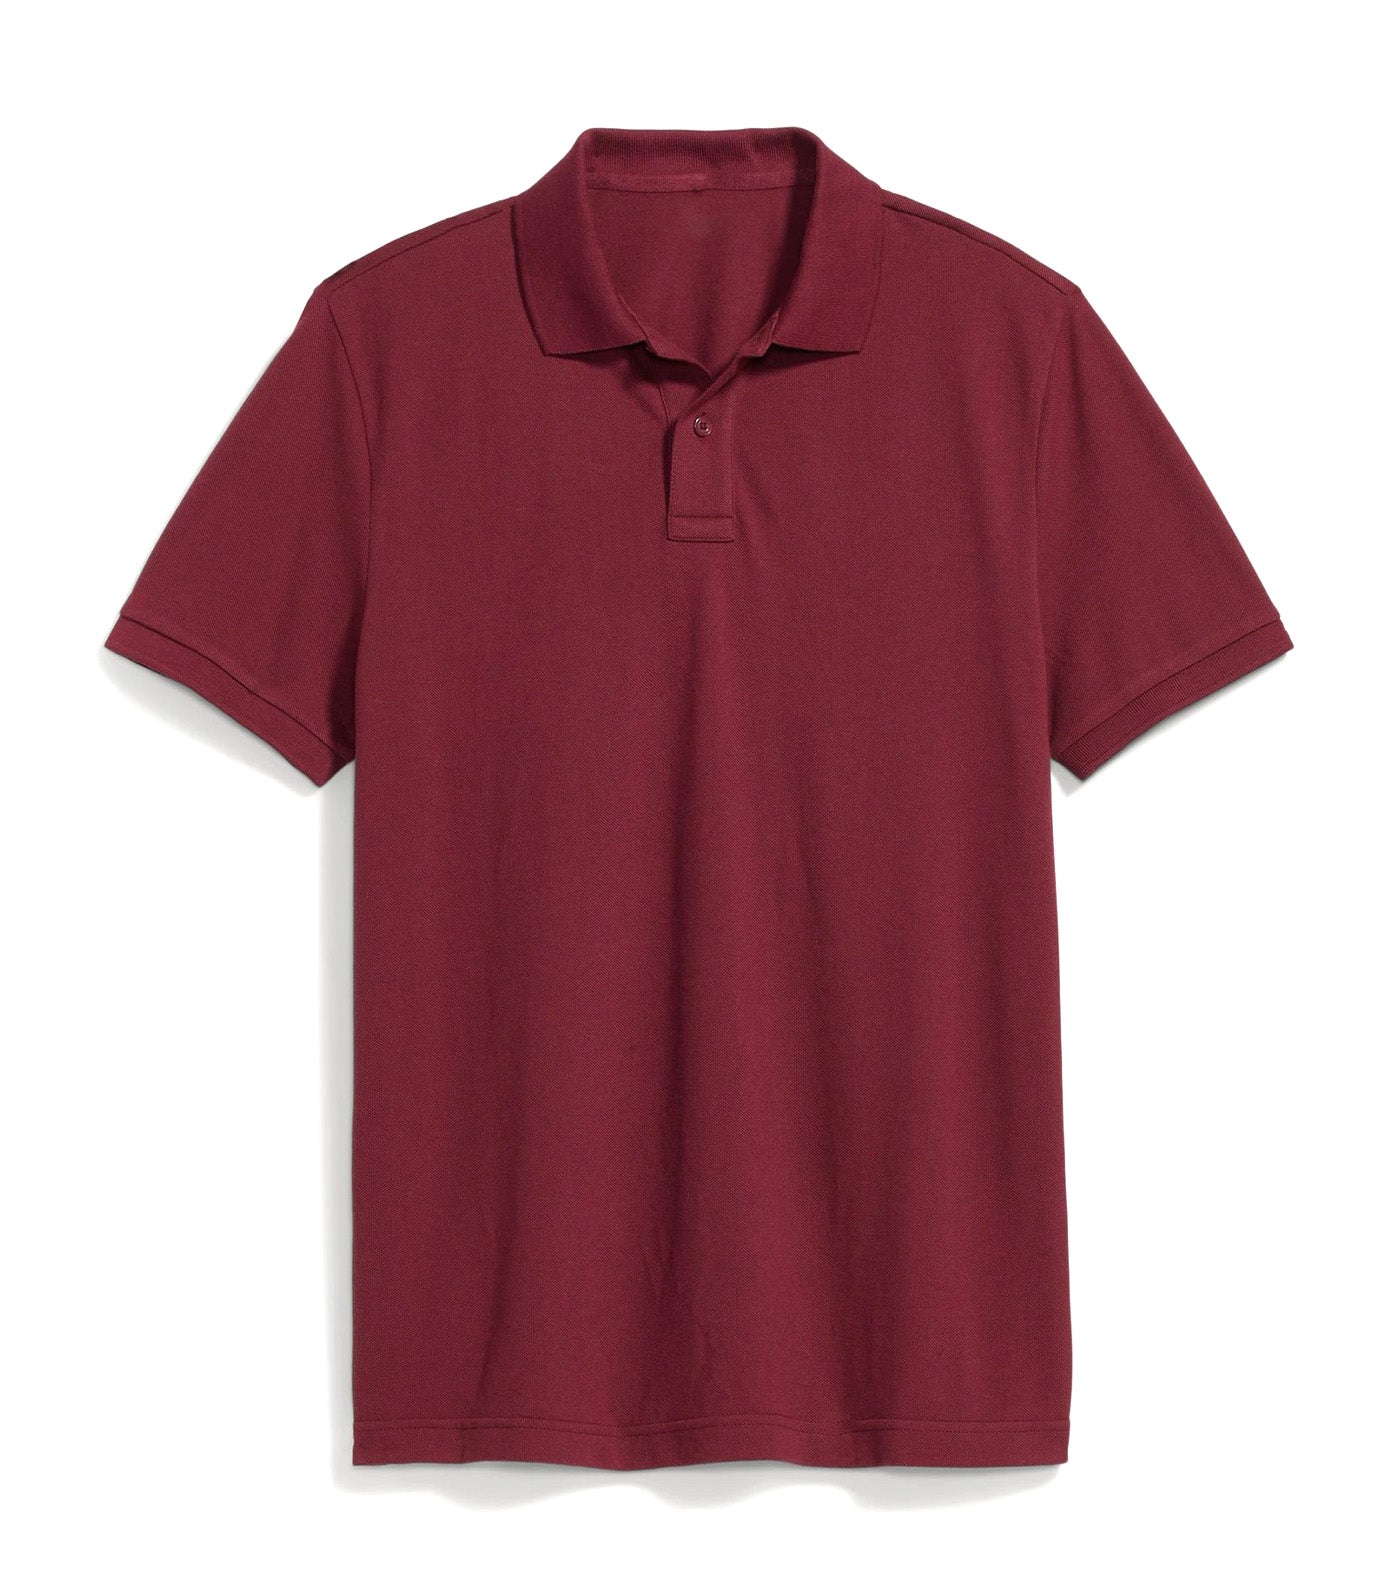 Short-Sleeve Pique Polo for Men Wine Stain